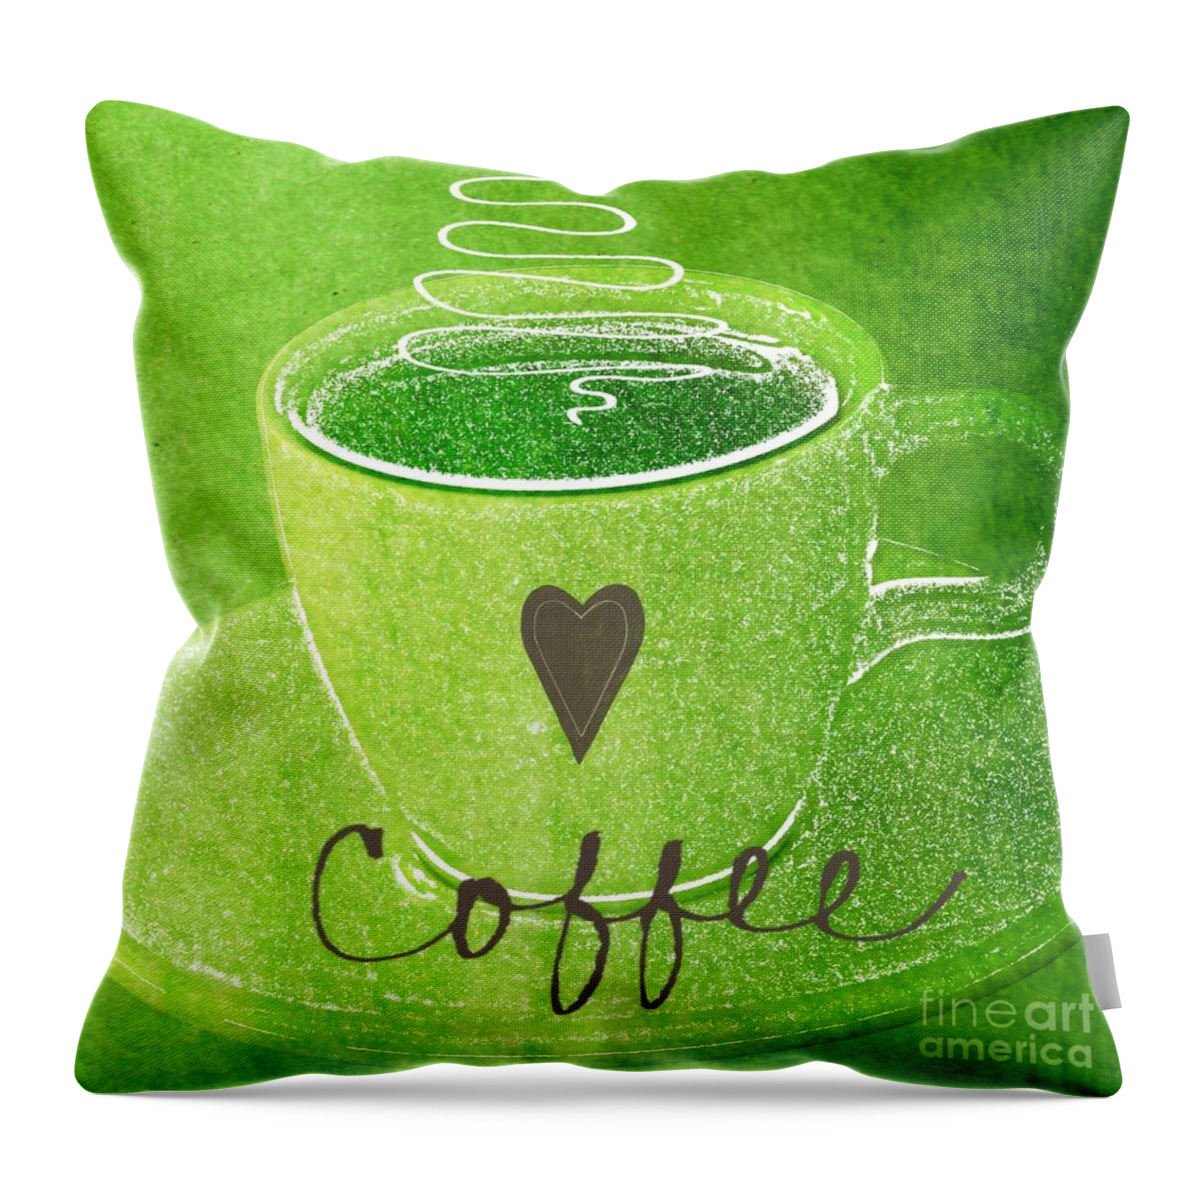 Espresso Throw Pillow featuring the painting Coffee by Linda Woods